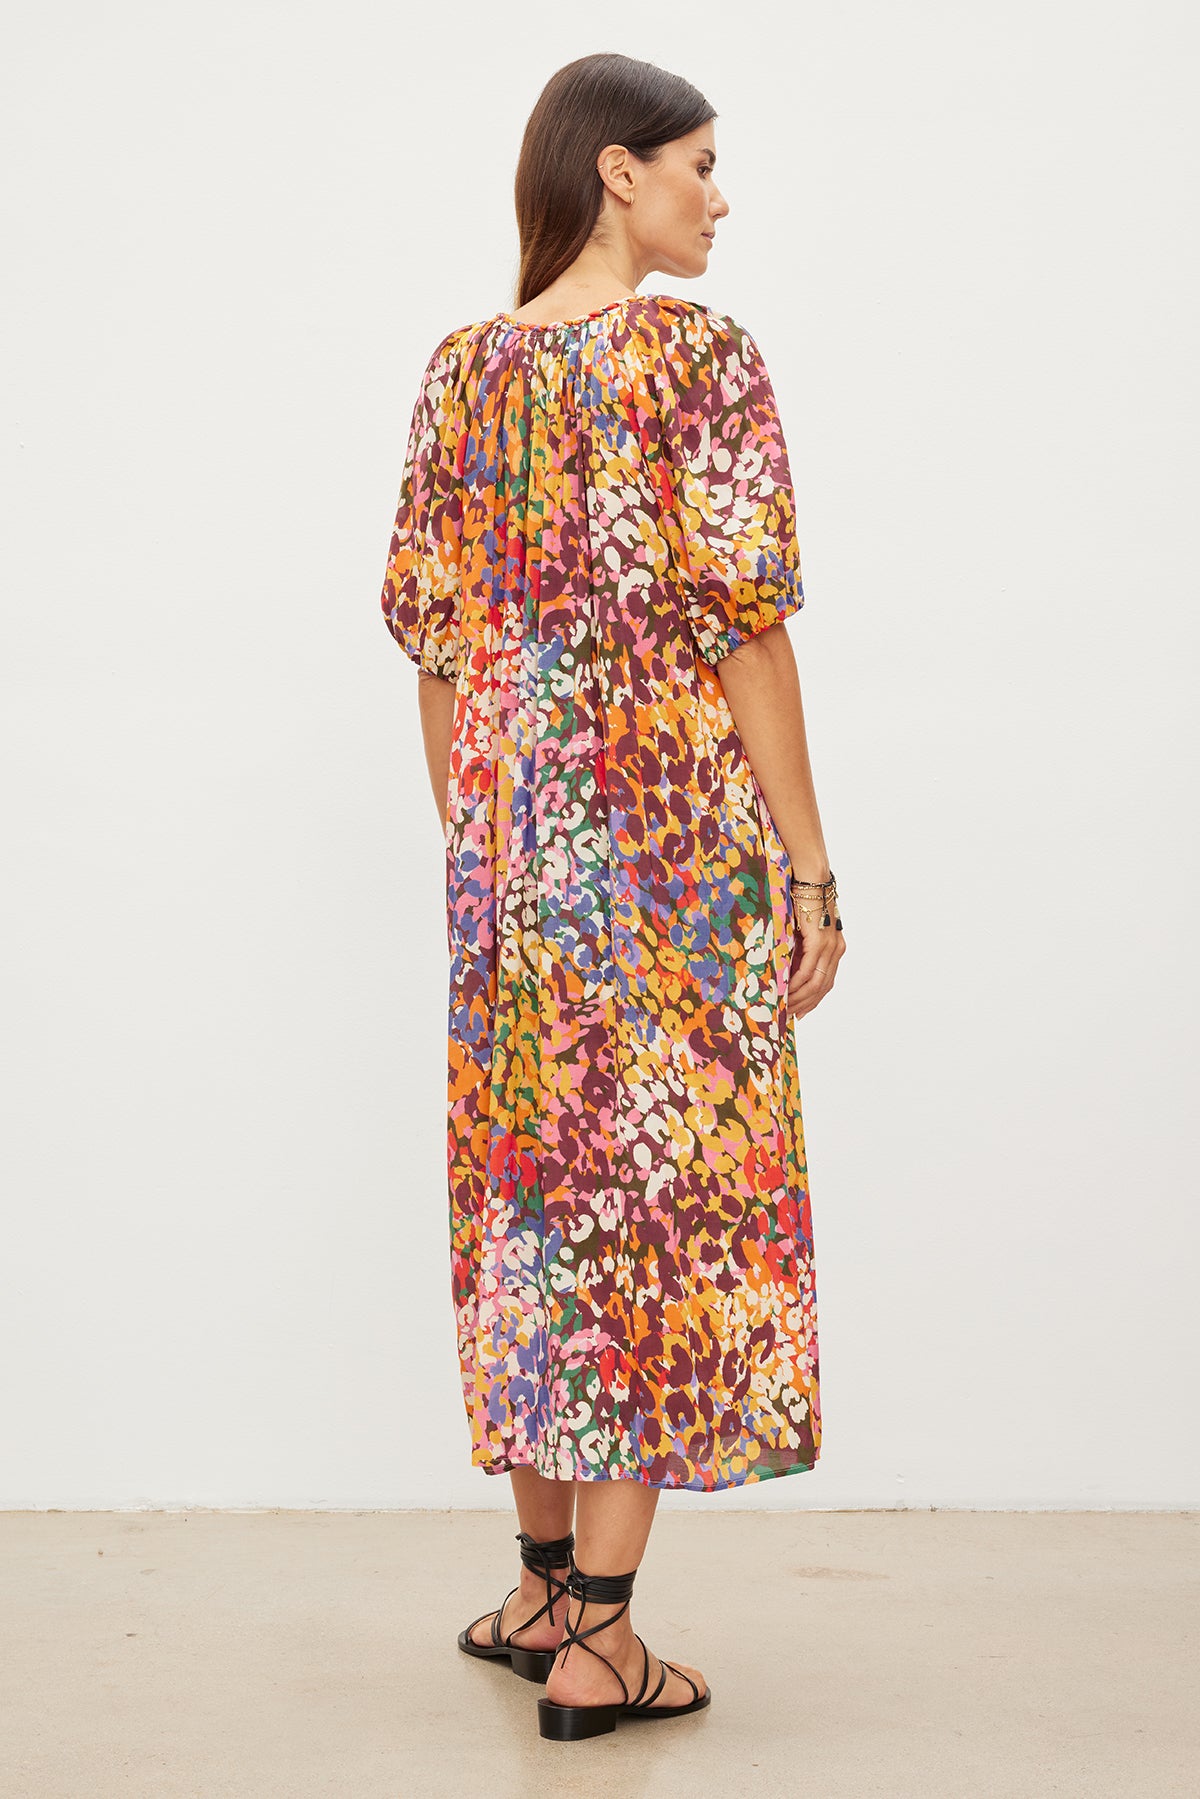 A woman viewed from the side wears a Velvet by Graham & Spencer CAROL PRINTED BOHO DRESS and black strappy sandals, standing against a plain white background.-35955494224065